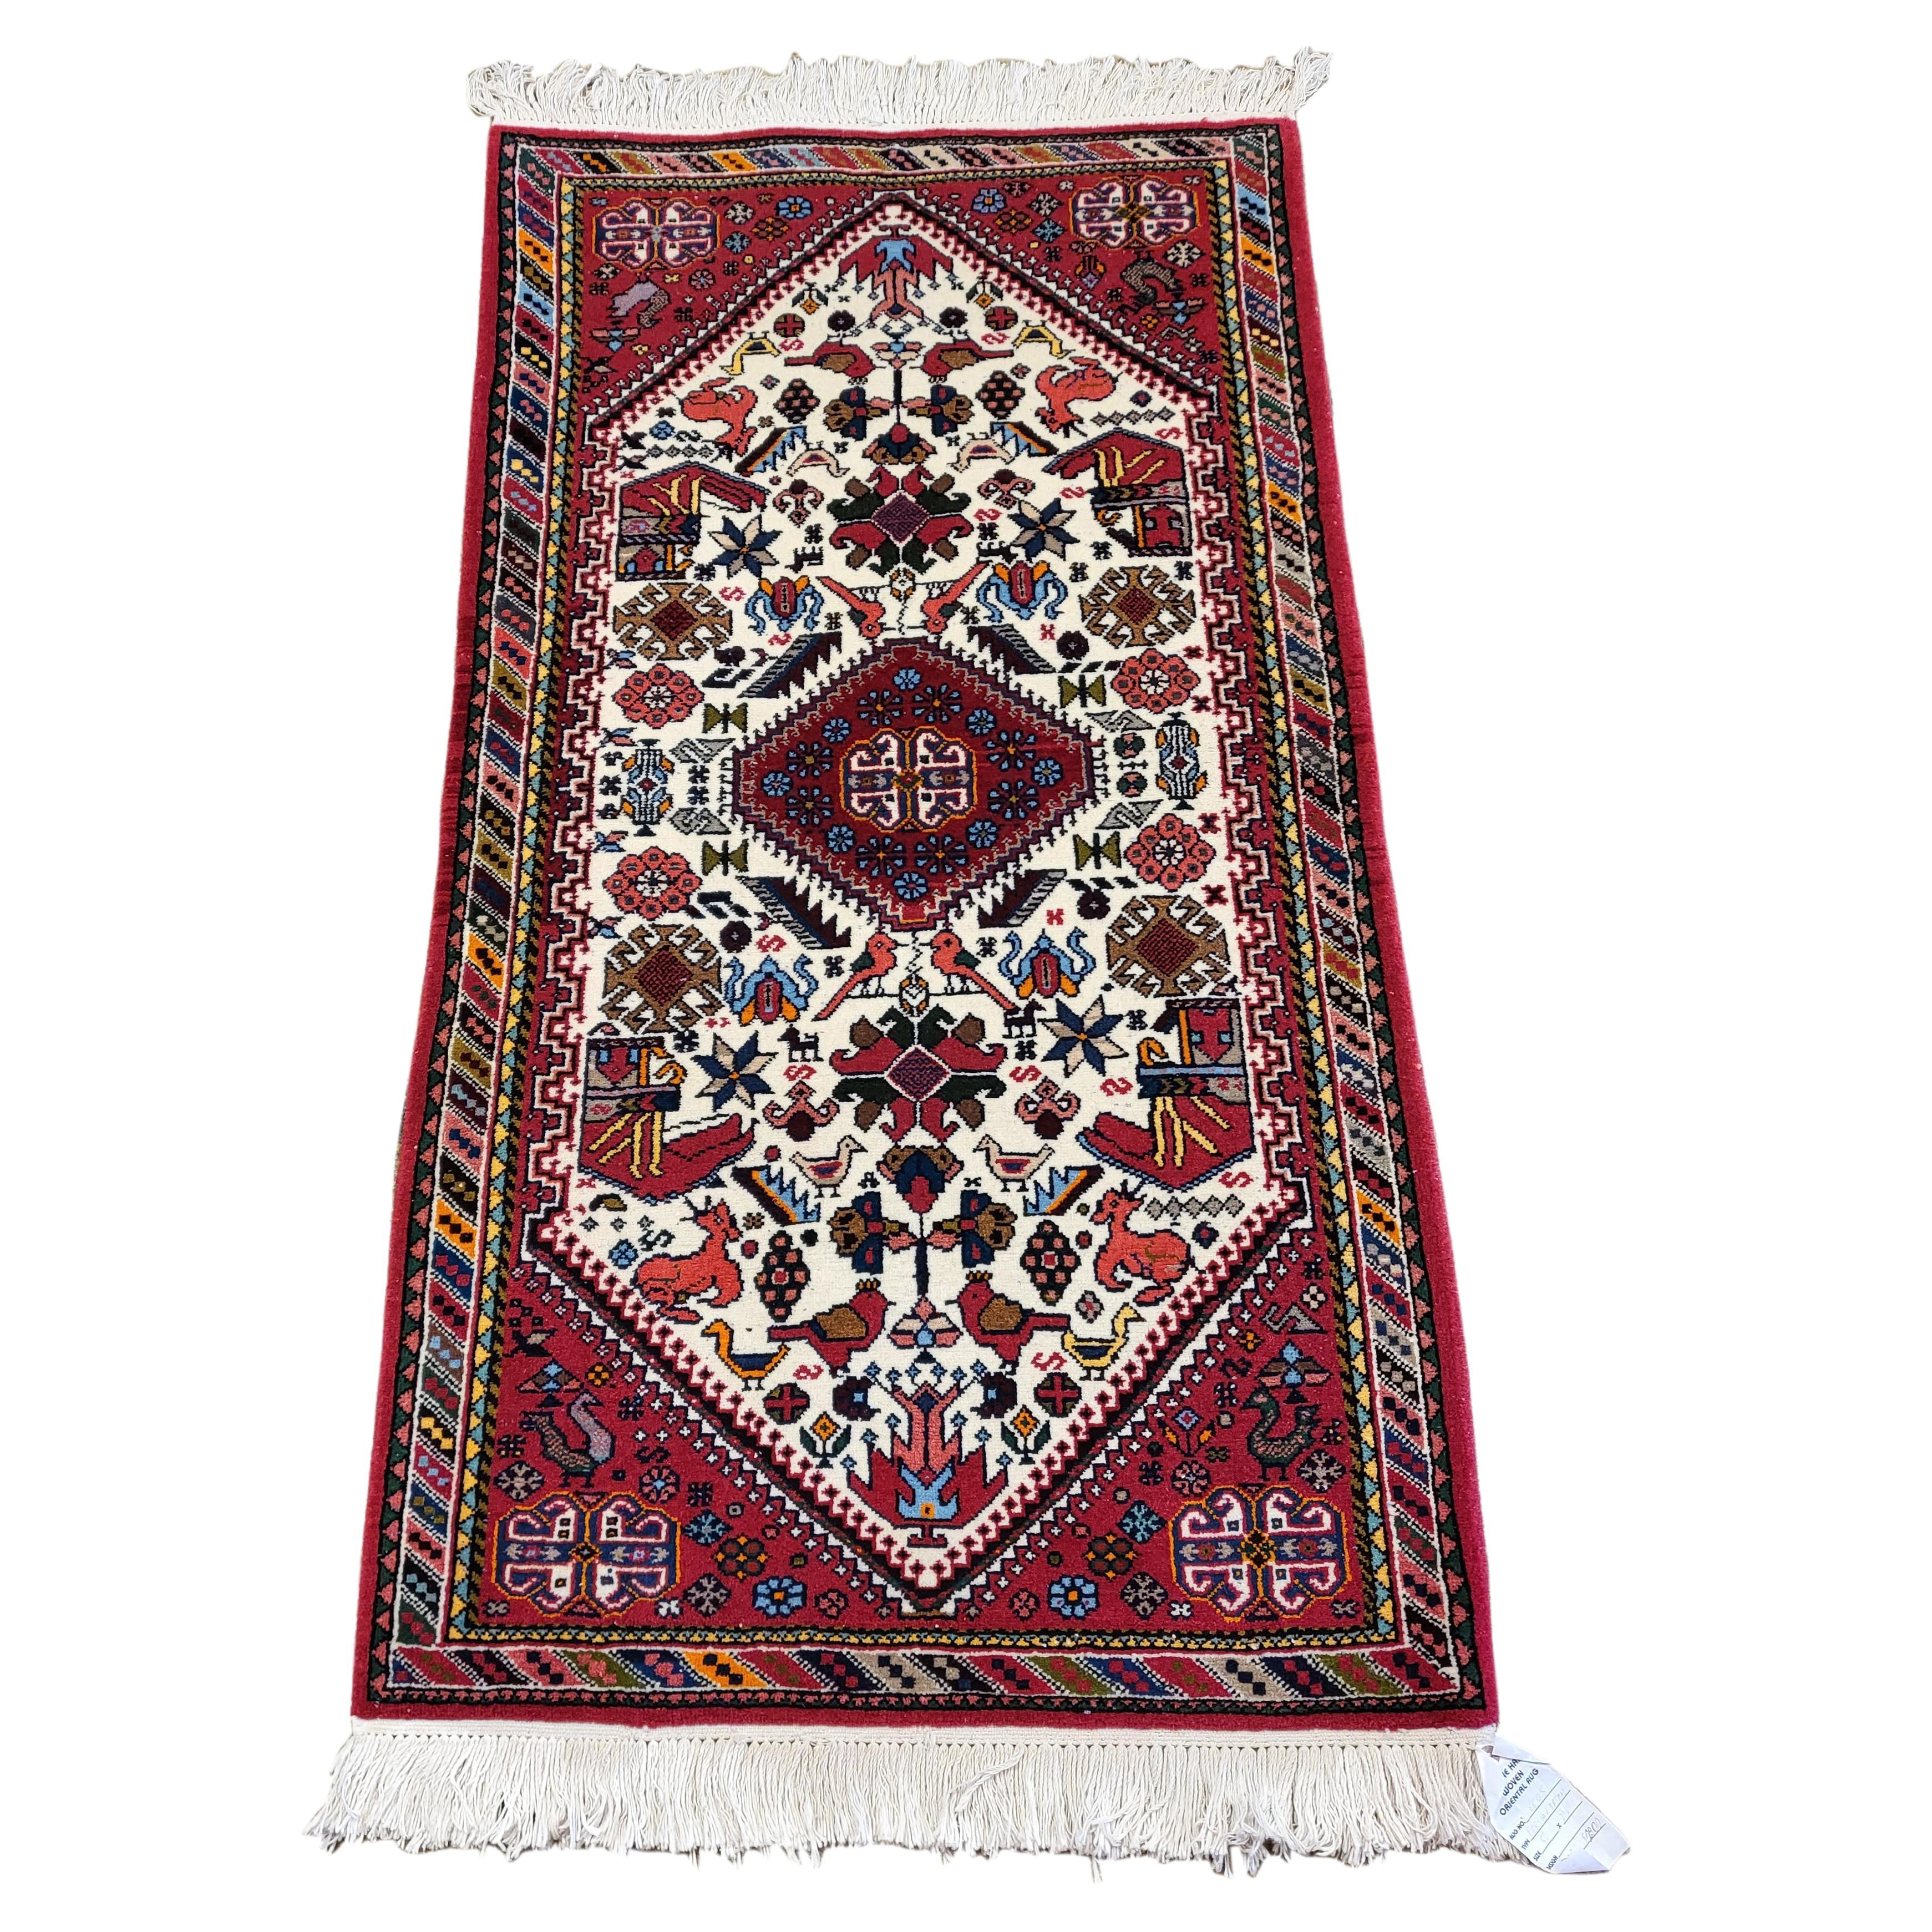 3'x5' Antique Abadeh - Tribal Persian Rug - Cream For Sale